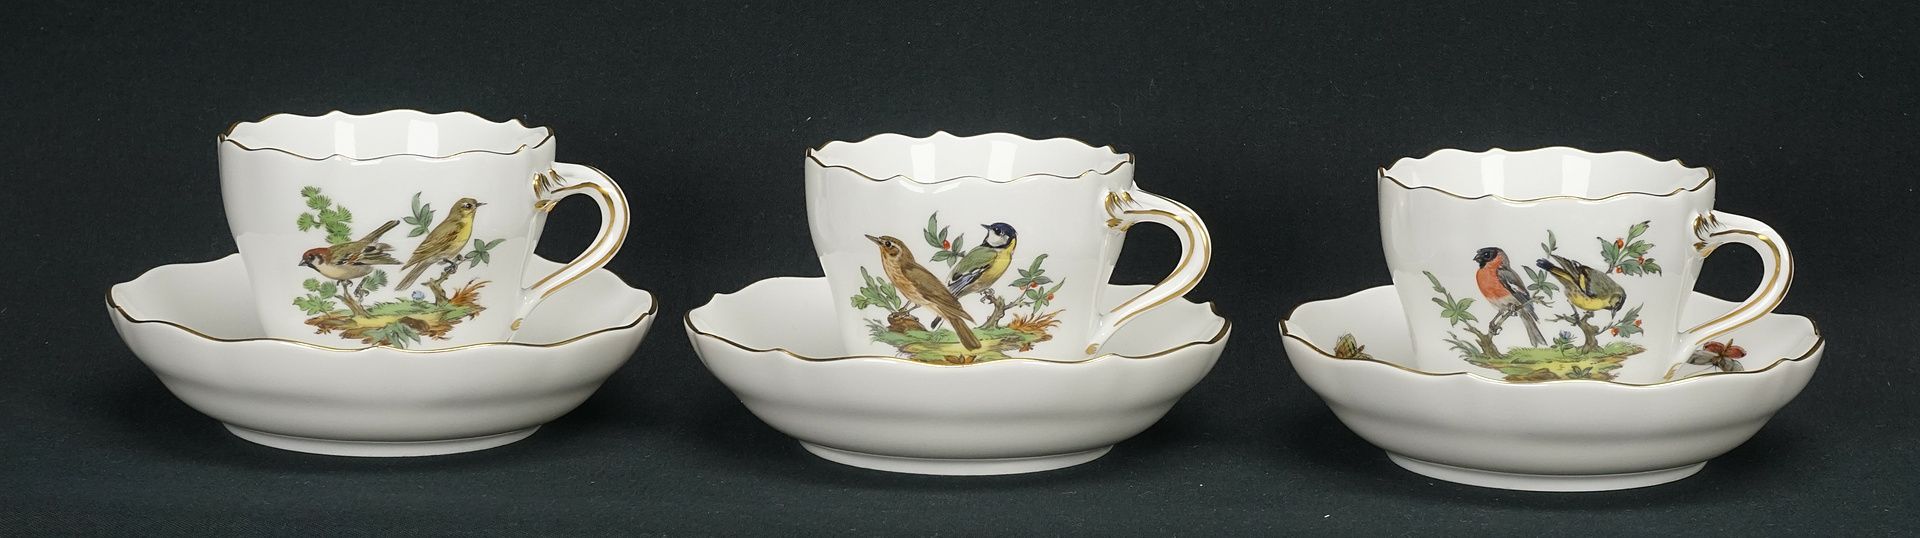 Meissen mocha service for six people with bird painting   - Image 3 of 6